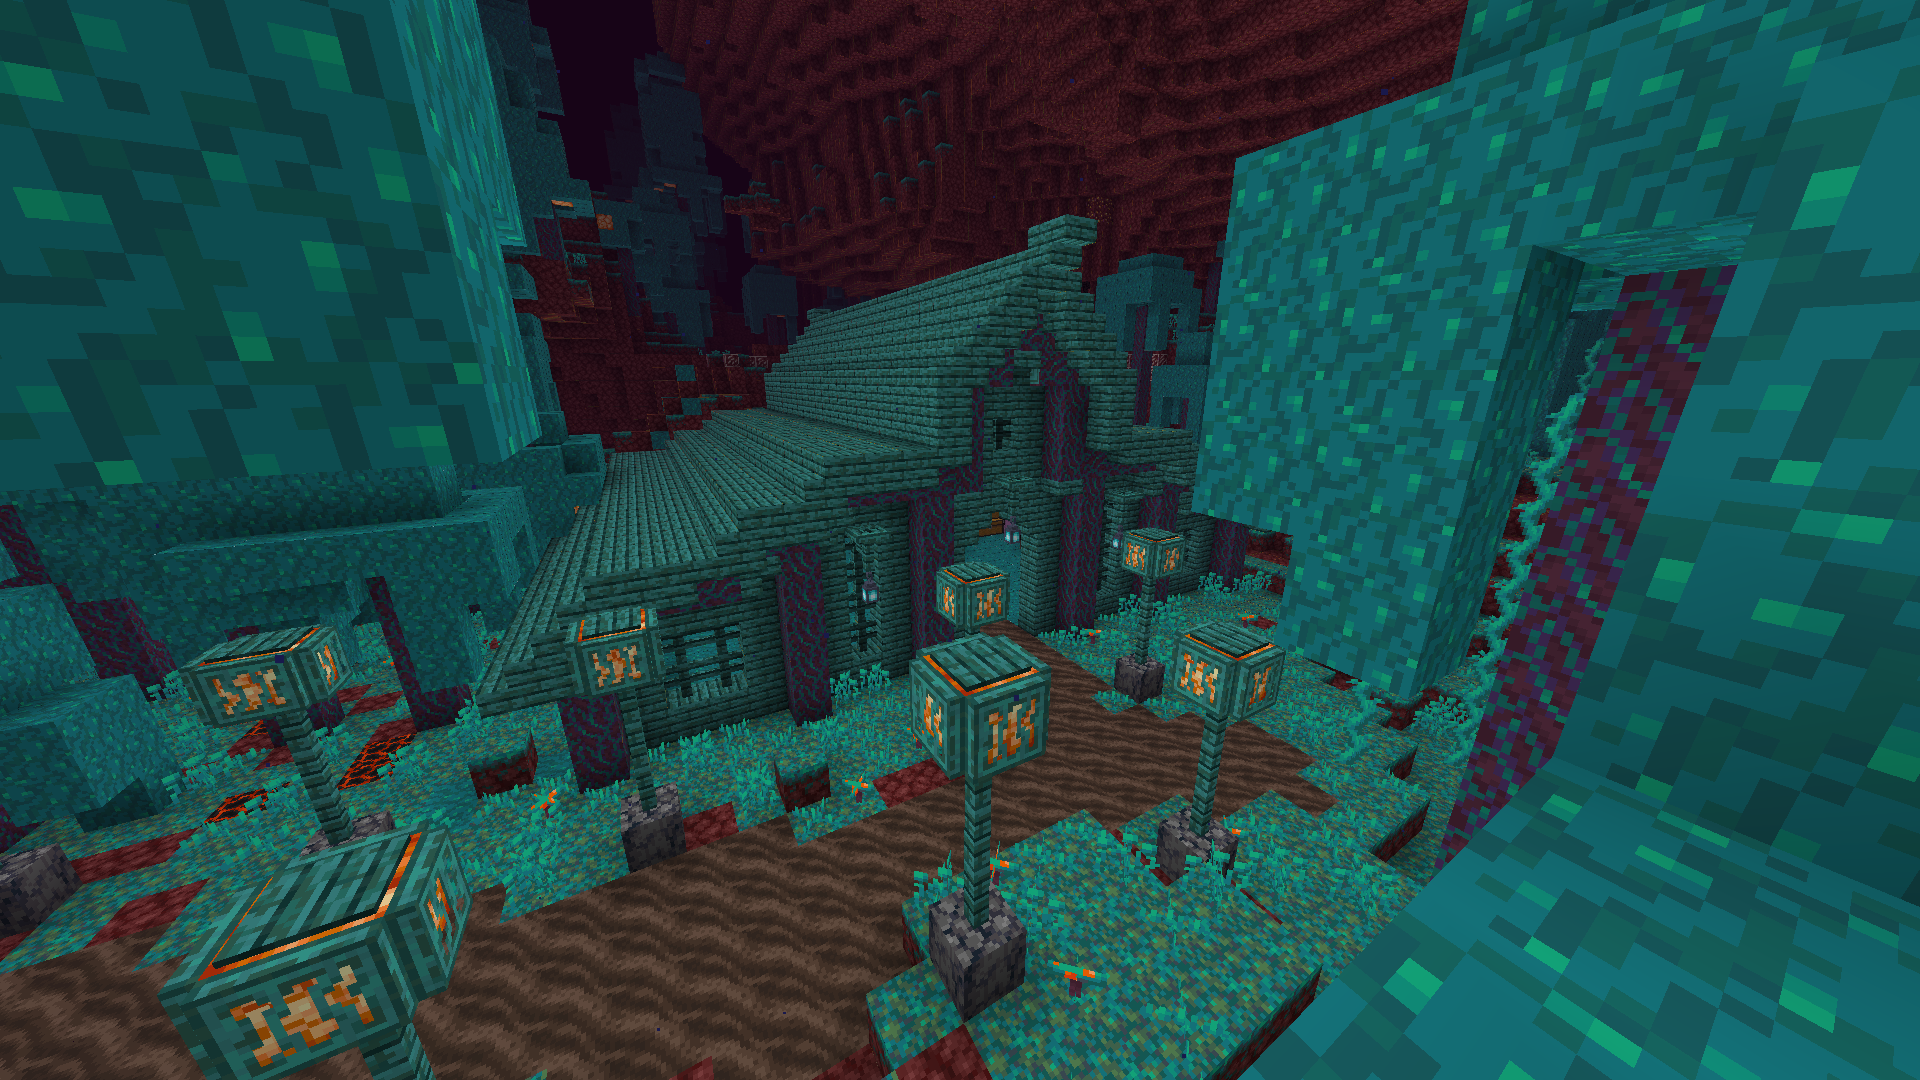 Hello, I want to show you my idea for house in new warped forest biome. What do u think?